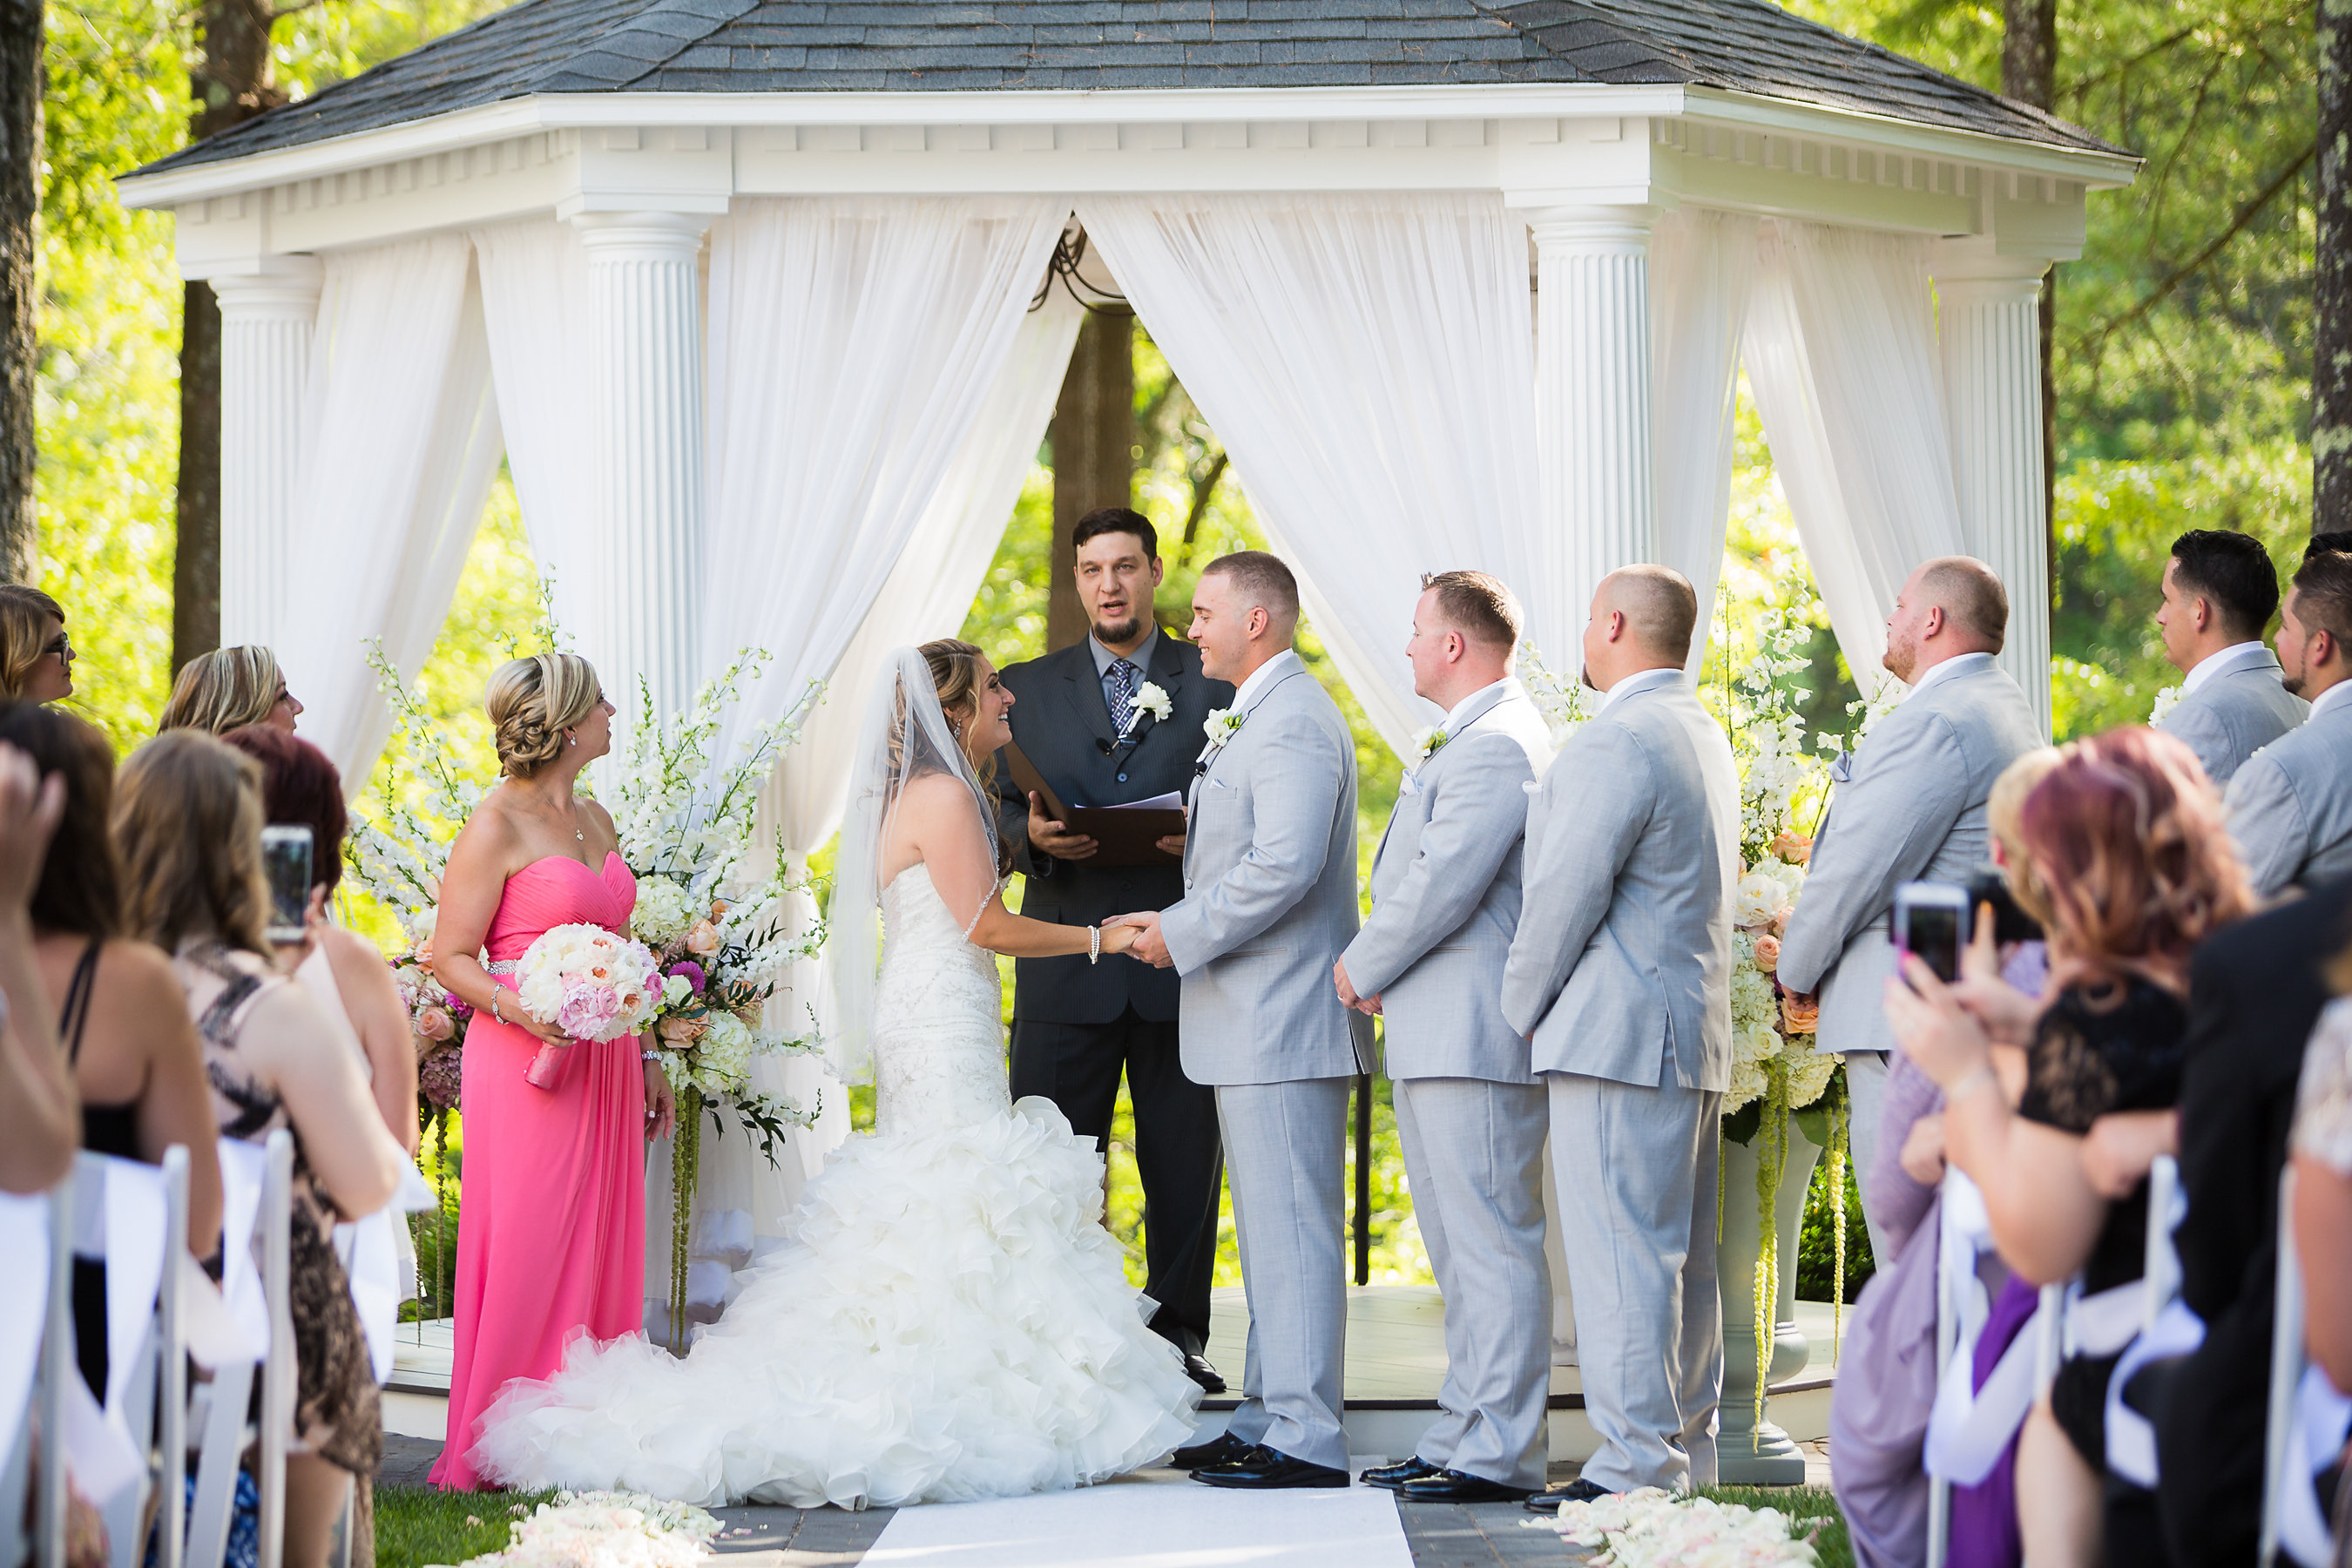 Summer wedding ceremony at Lakeview Pavilion